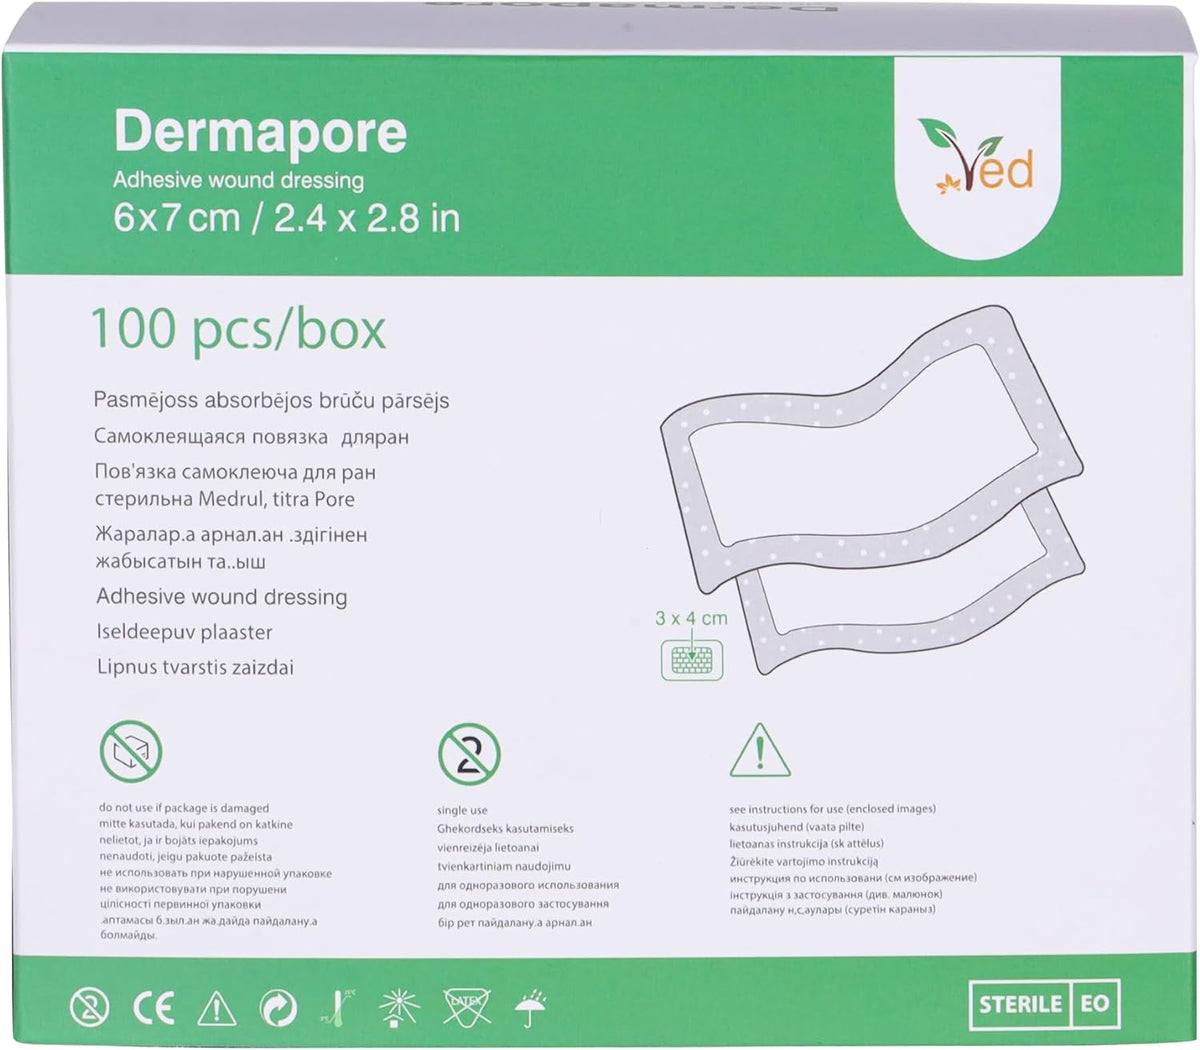 VED Dermapore Adhesive Wound Dressing- Suitable for cuts and grazes, Diabetic Leg ulcers, venous Leg ulcers, Small Pressure sores- Medium, 6 X 7cm (Pack of 100).